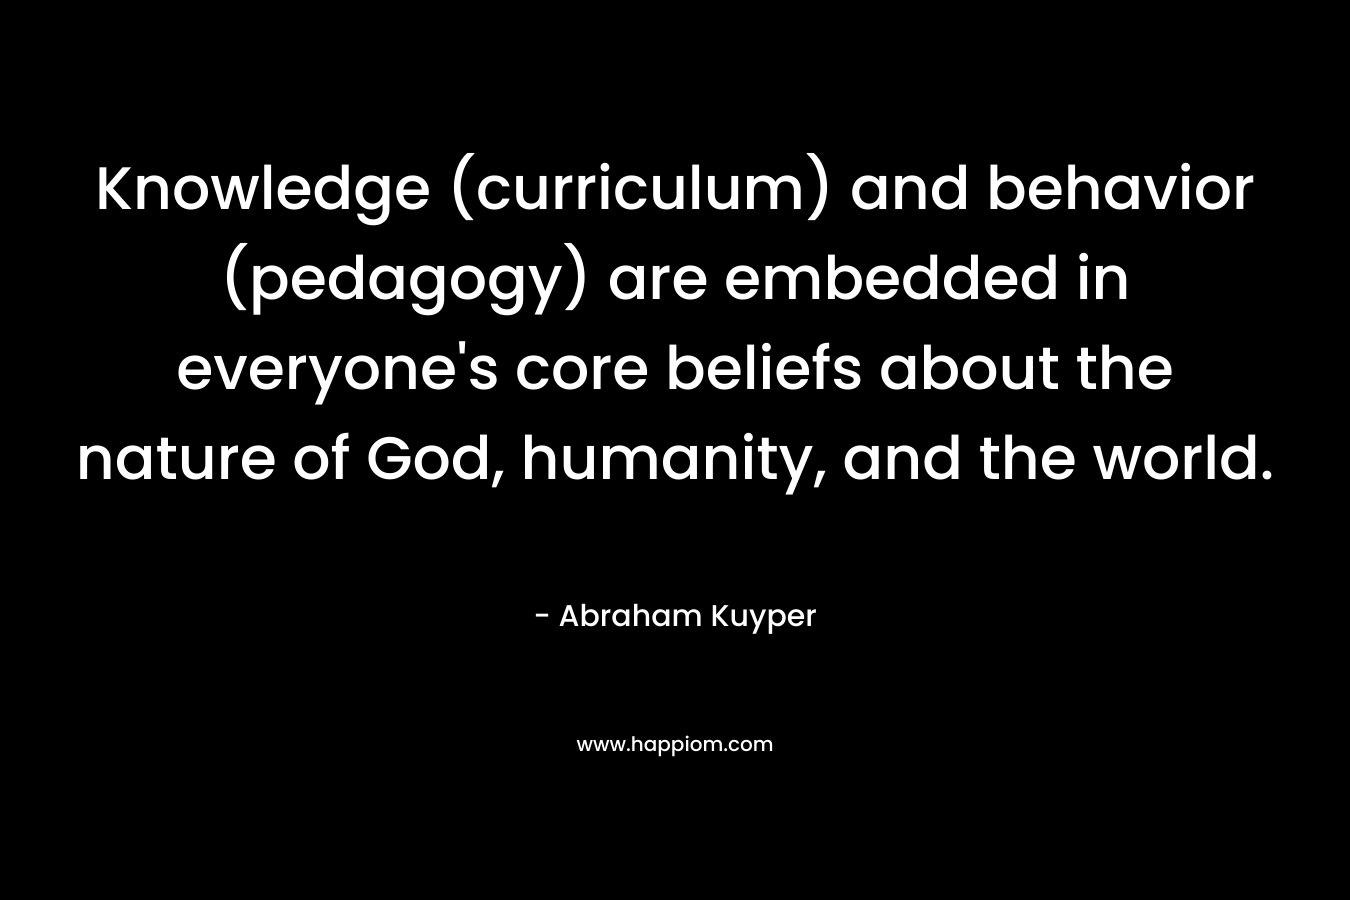 Knowledge (curriculum) and behavior (pedagogy) are embedded in everyone's core beliefs about the nature of God, humanity, and the world.